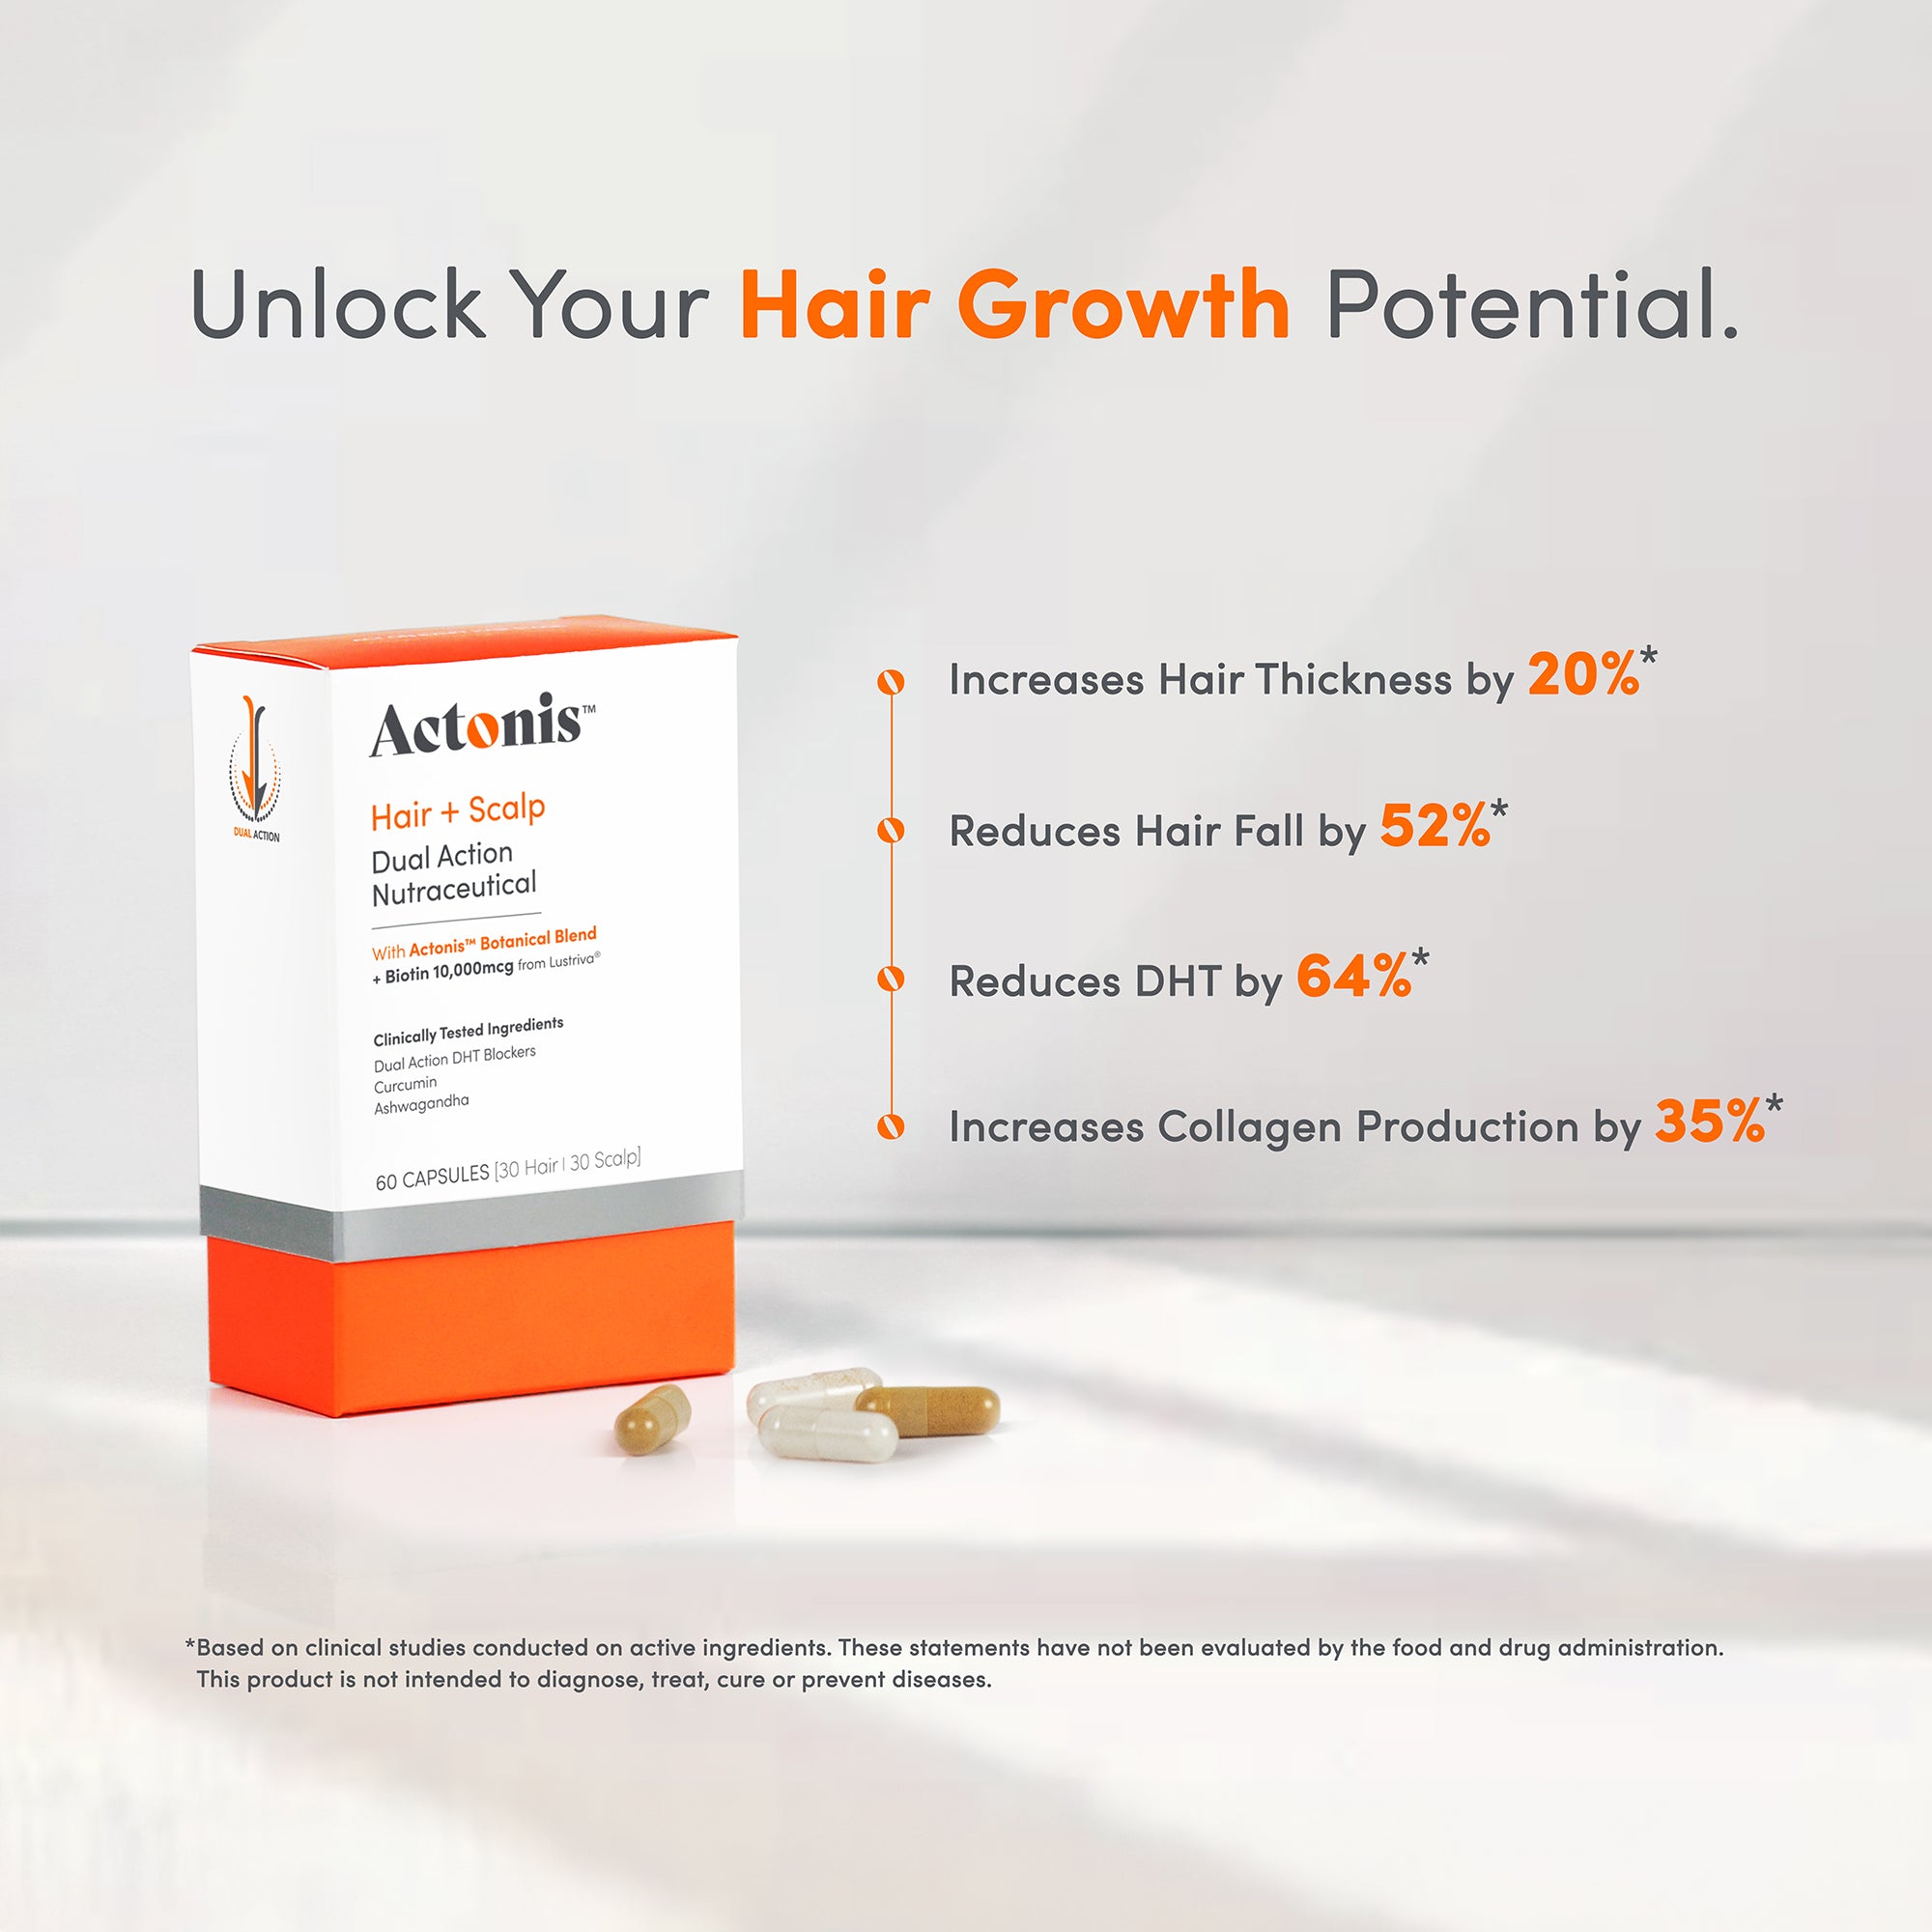 Actonis™ Hair & Scalp Dual Action Nutraceutical